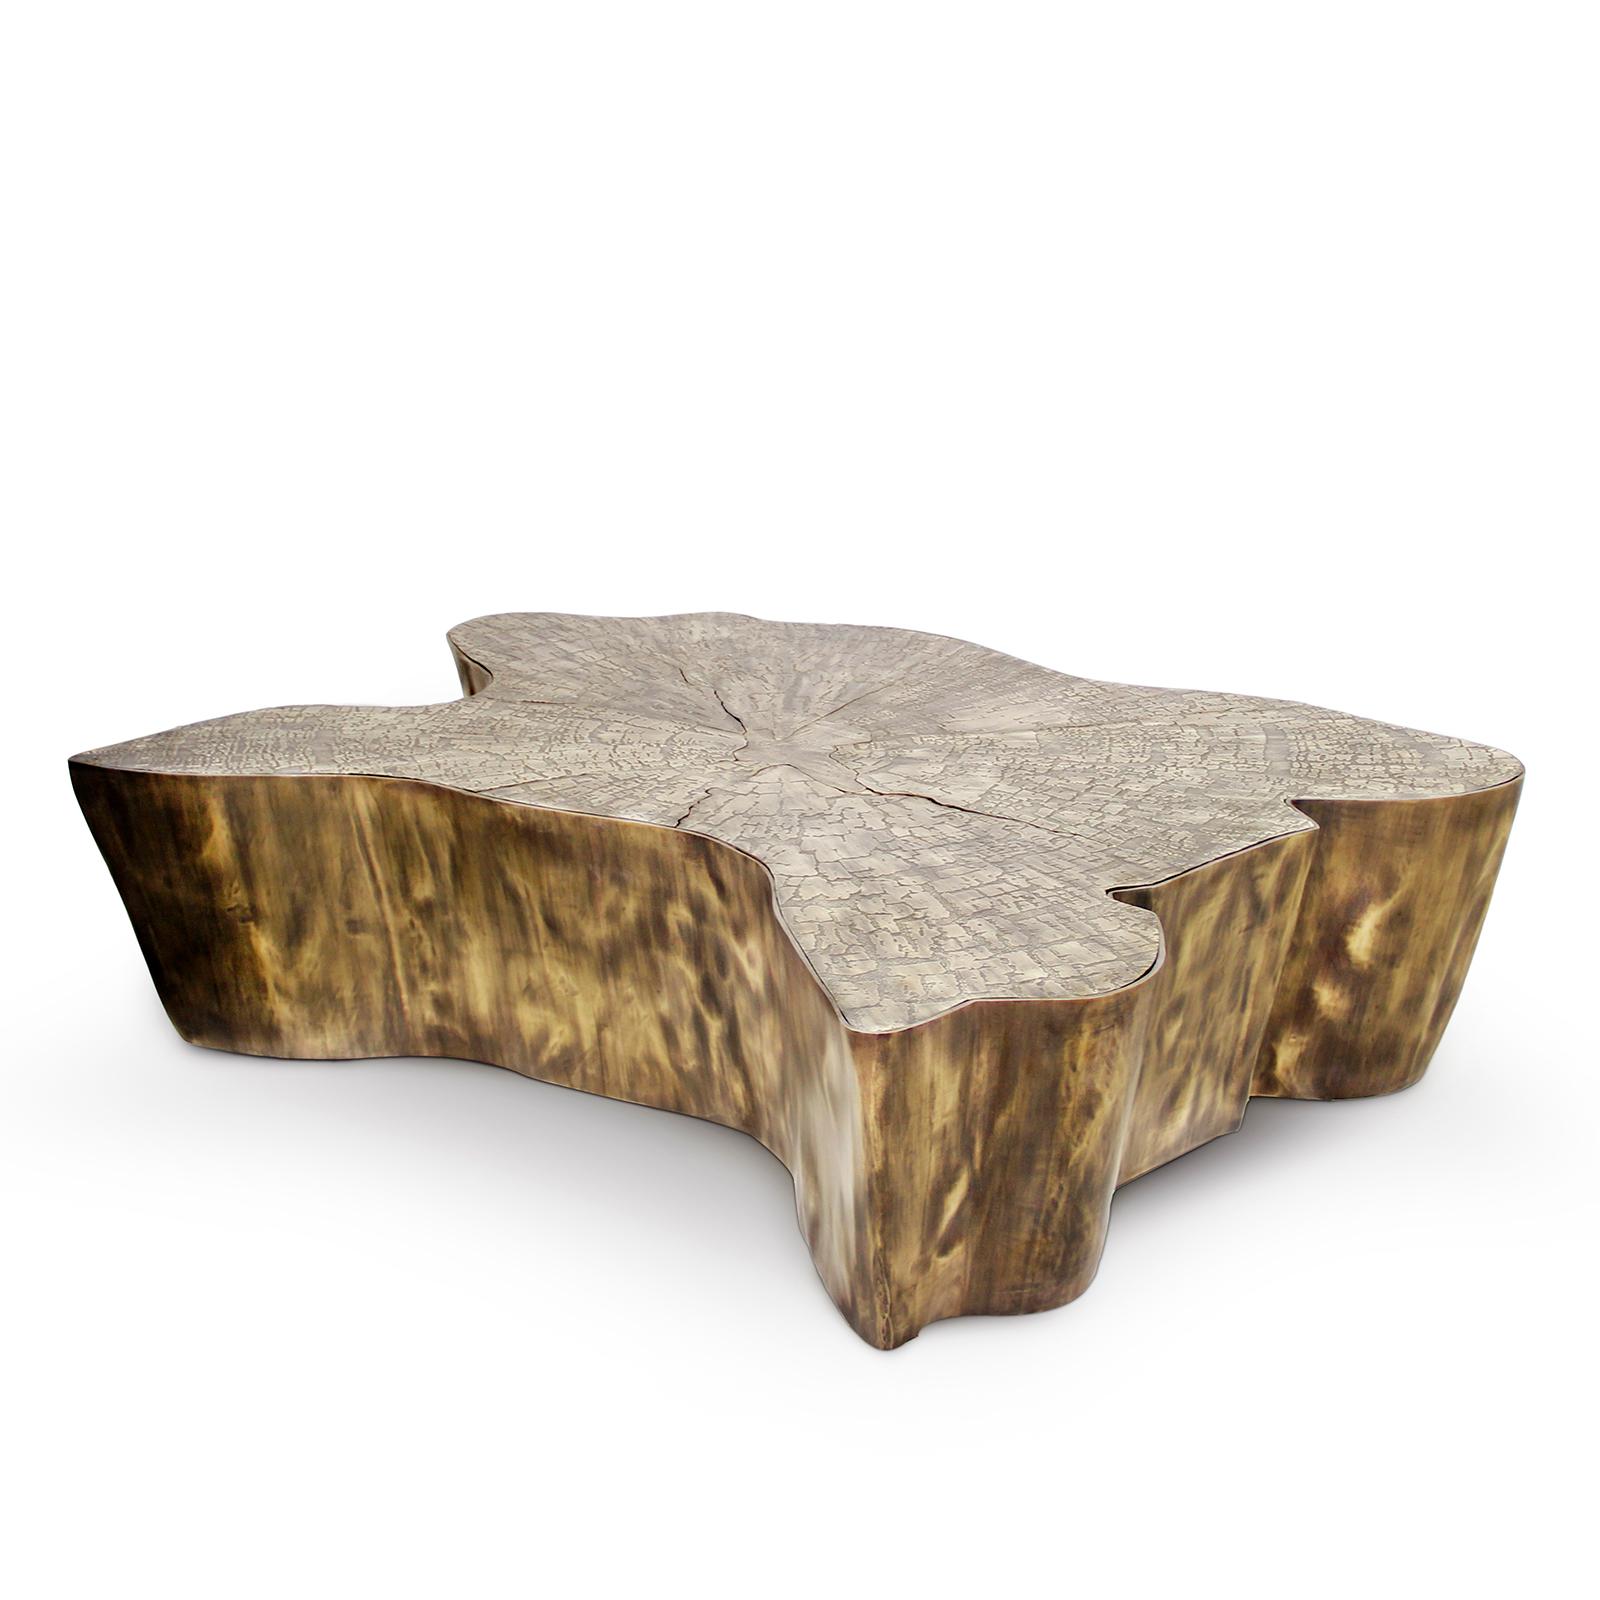 Coffee table heaven patinated with all structure
In solid brass in patinated finish. 
 Available in two sizes: 
L 123 x D 102 x H 30cm, price: 30900,00€. 
L 138 x D 95 x H 36cm, price: 33900,00€.